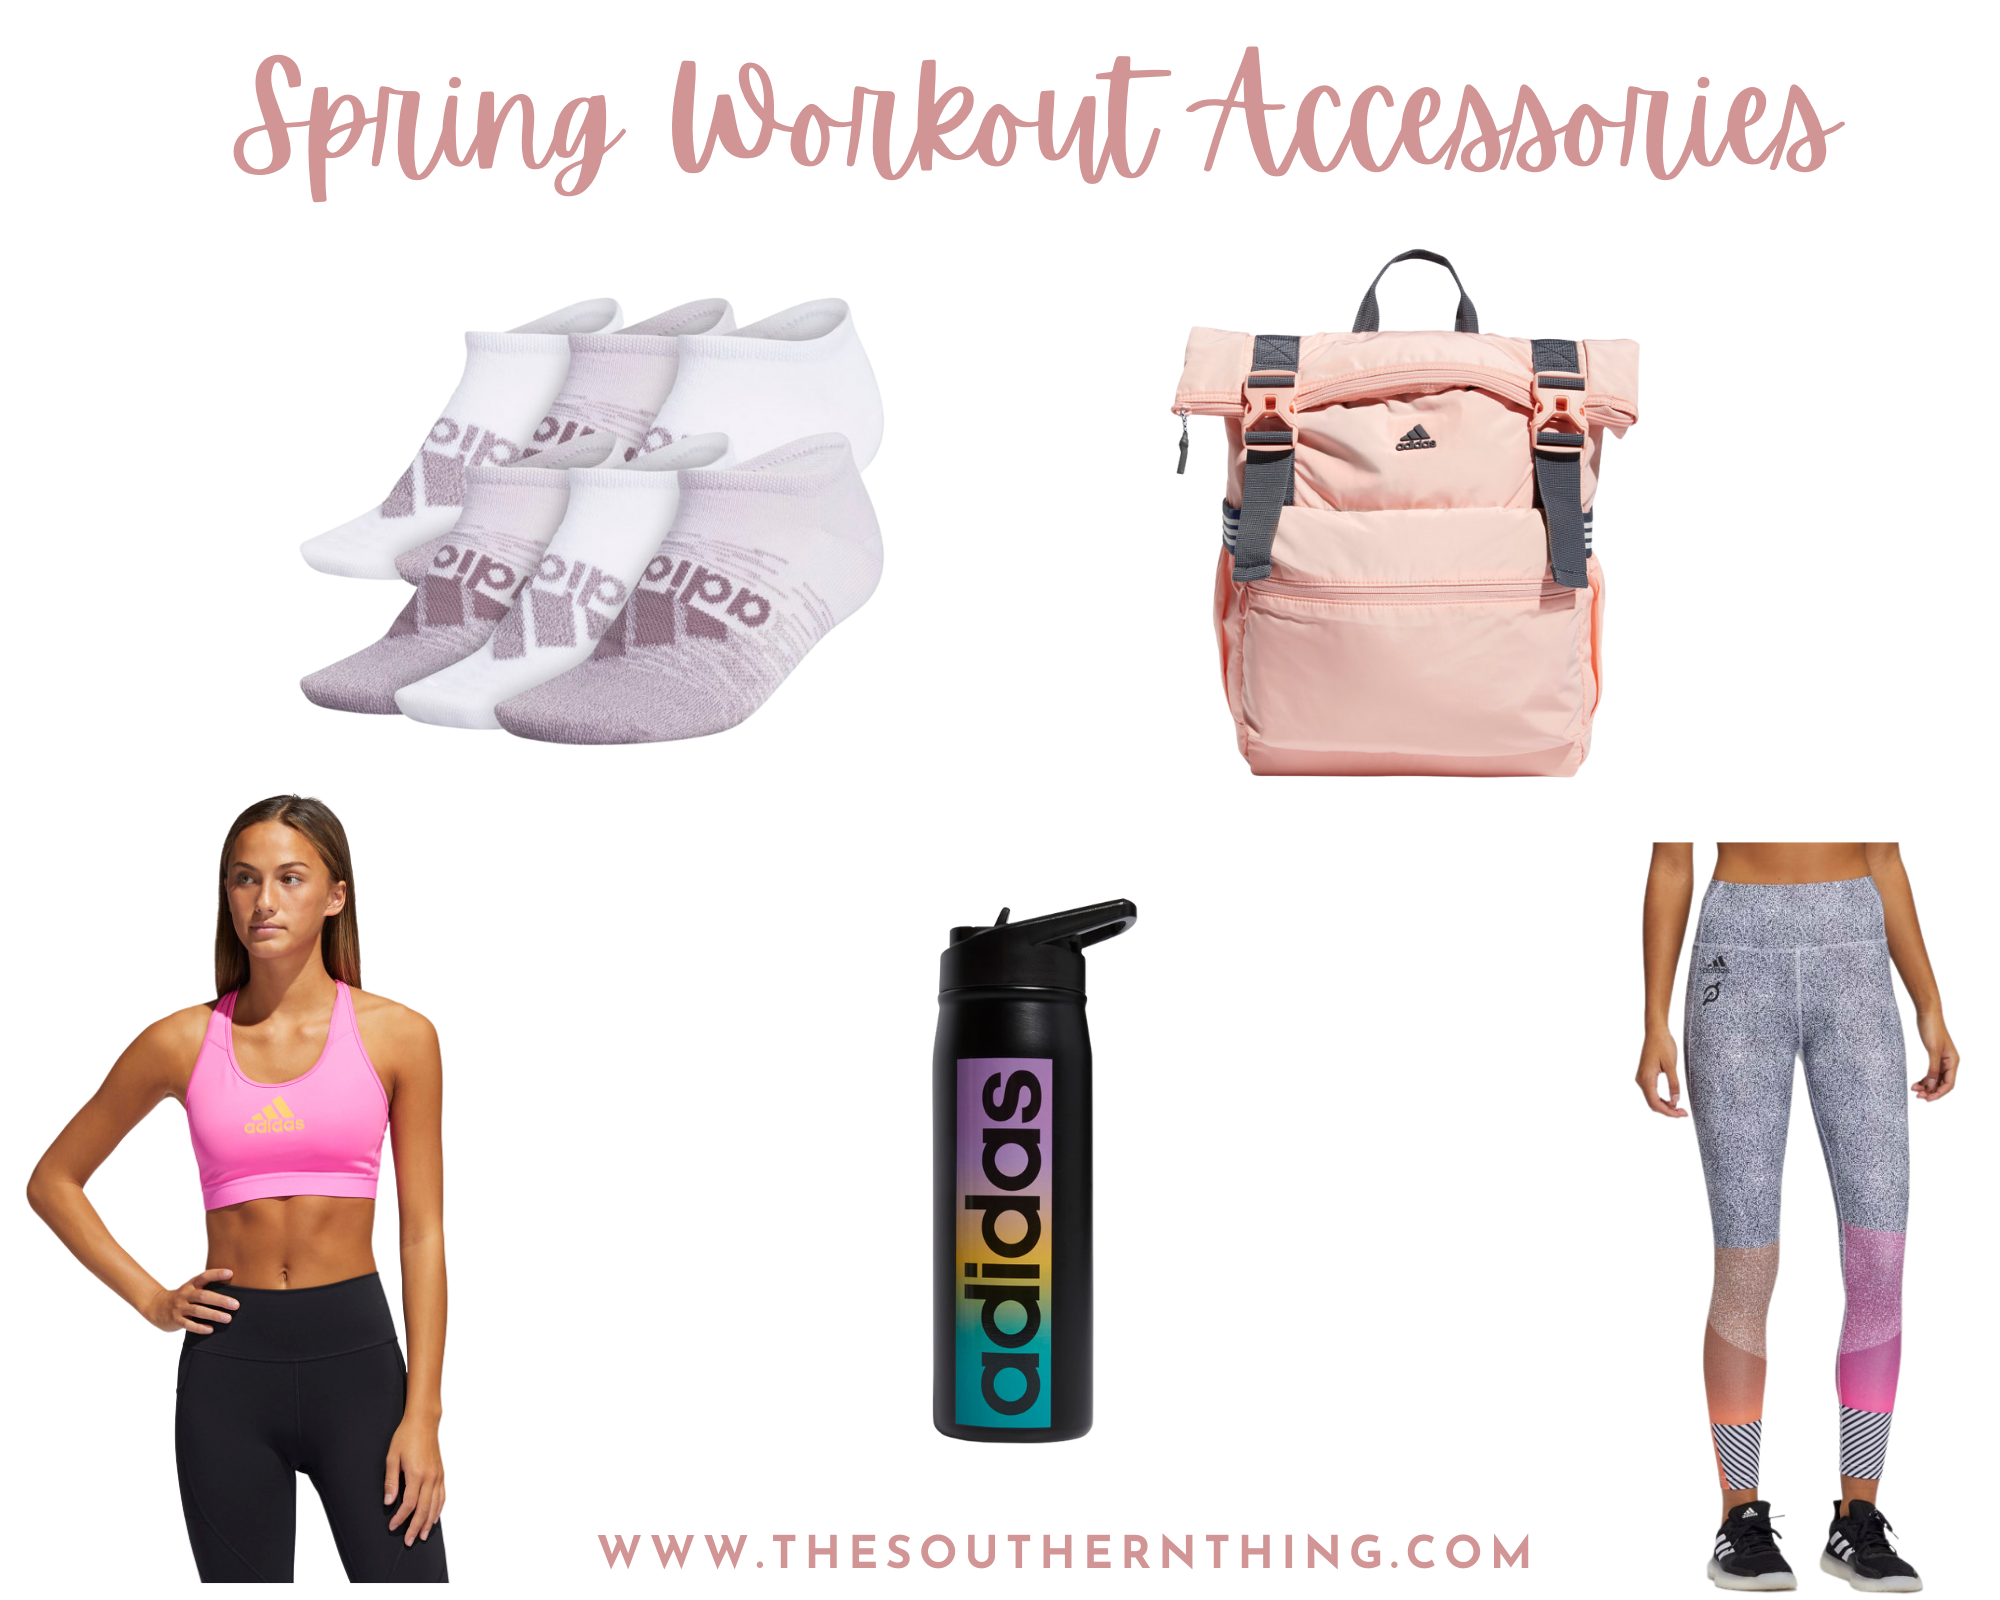 Spring Workout Accessories - The Southern Thing